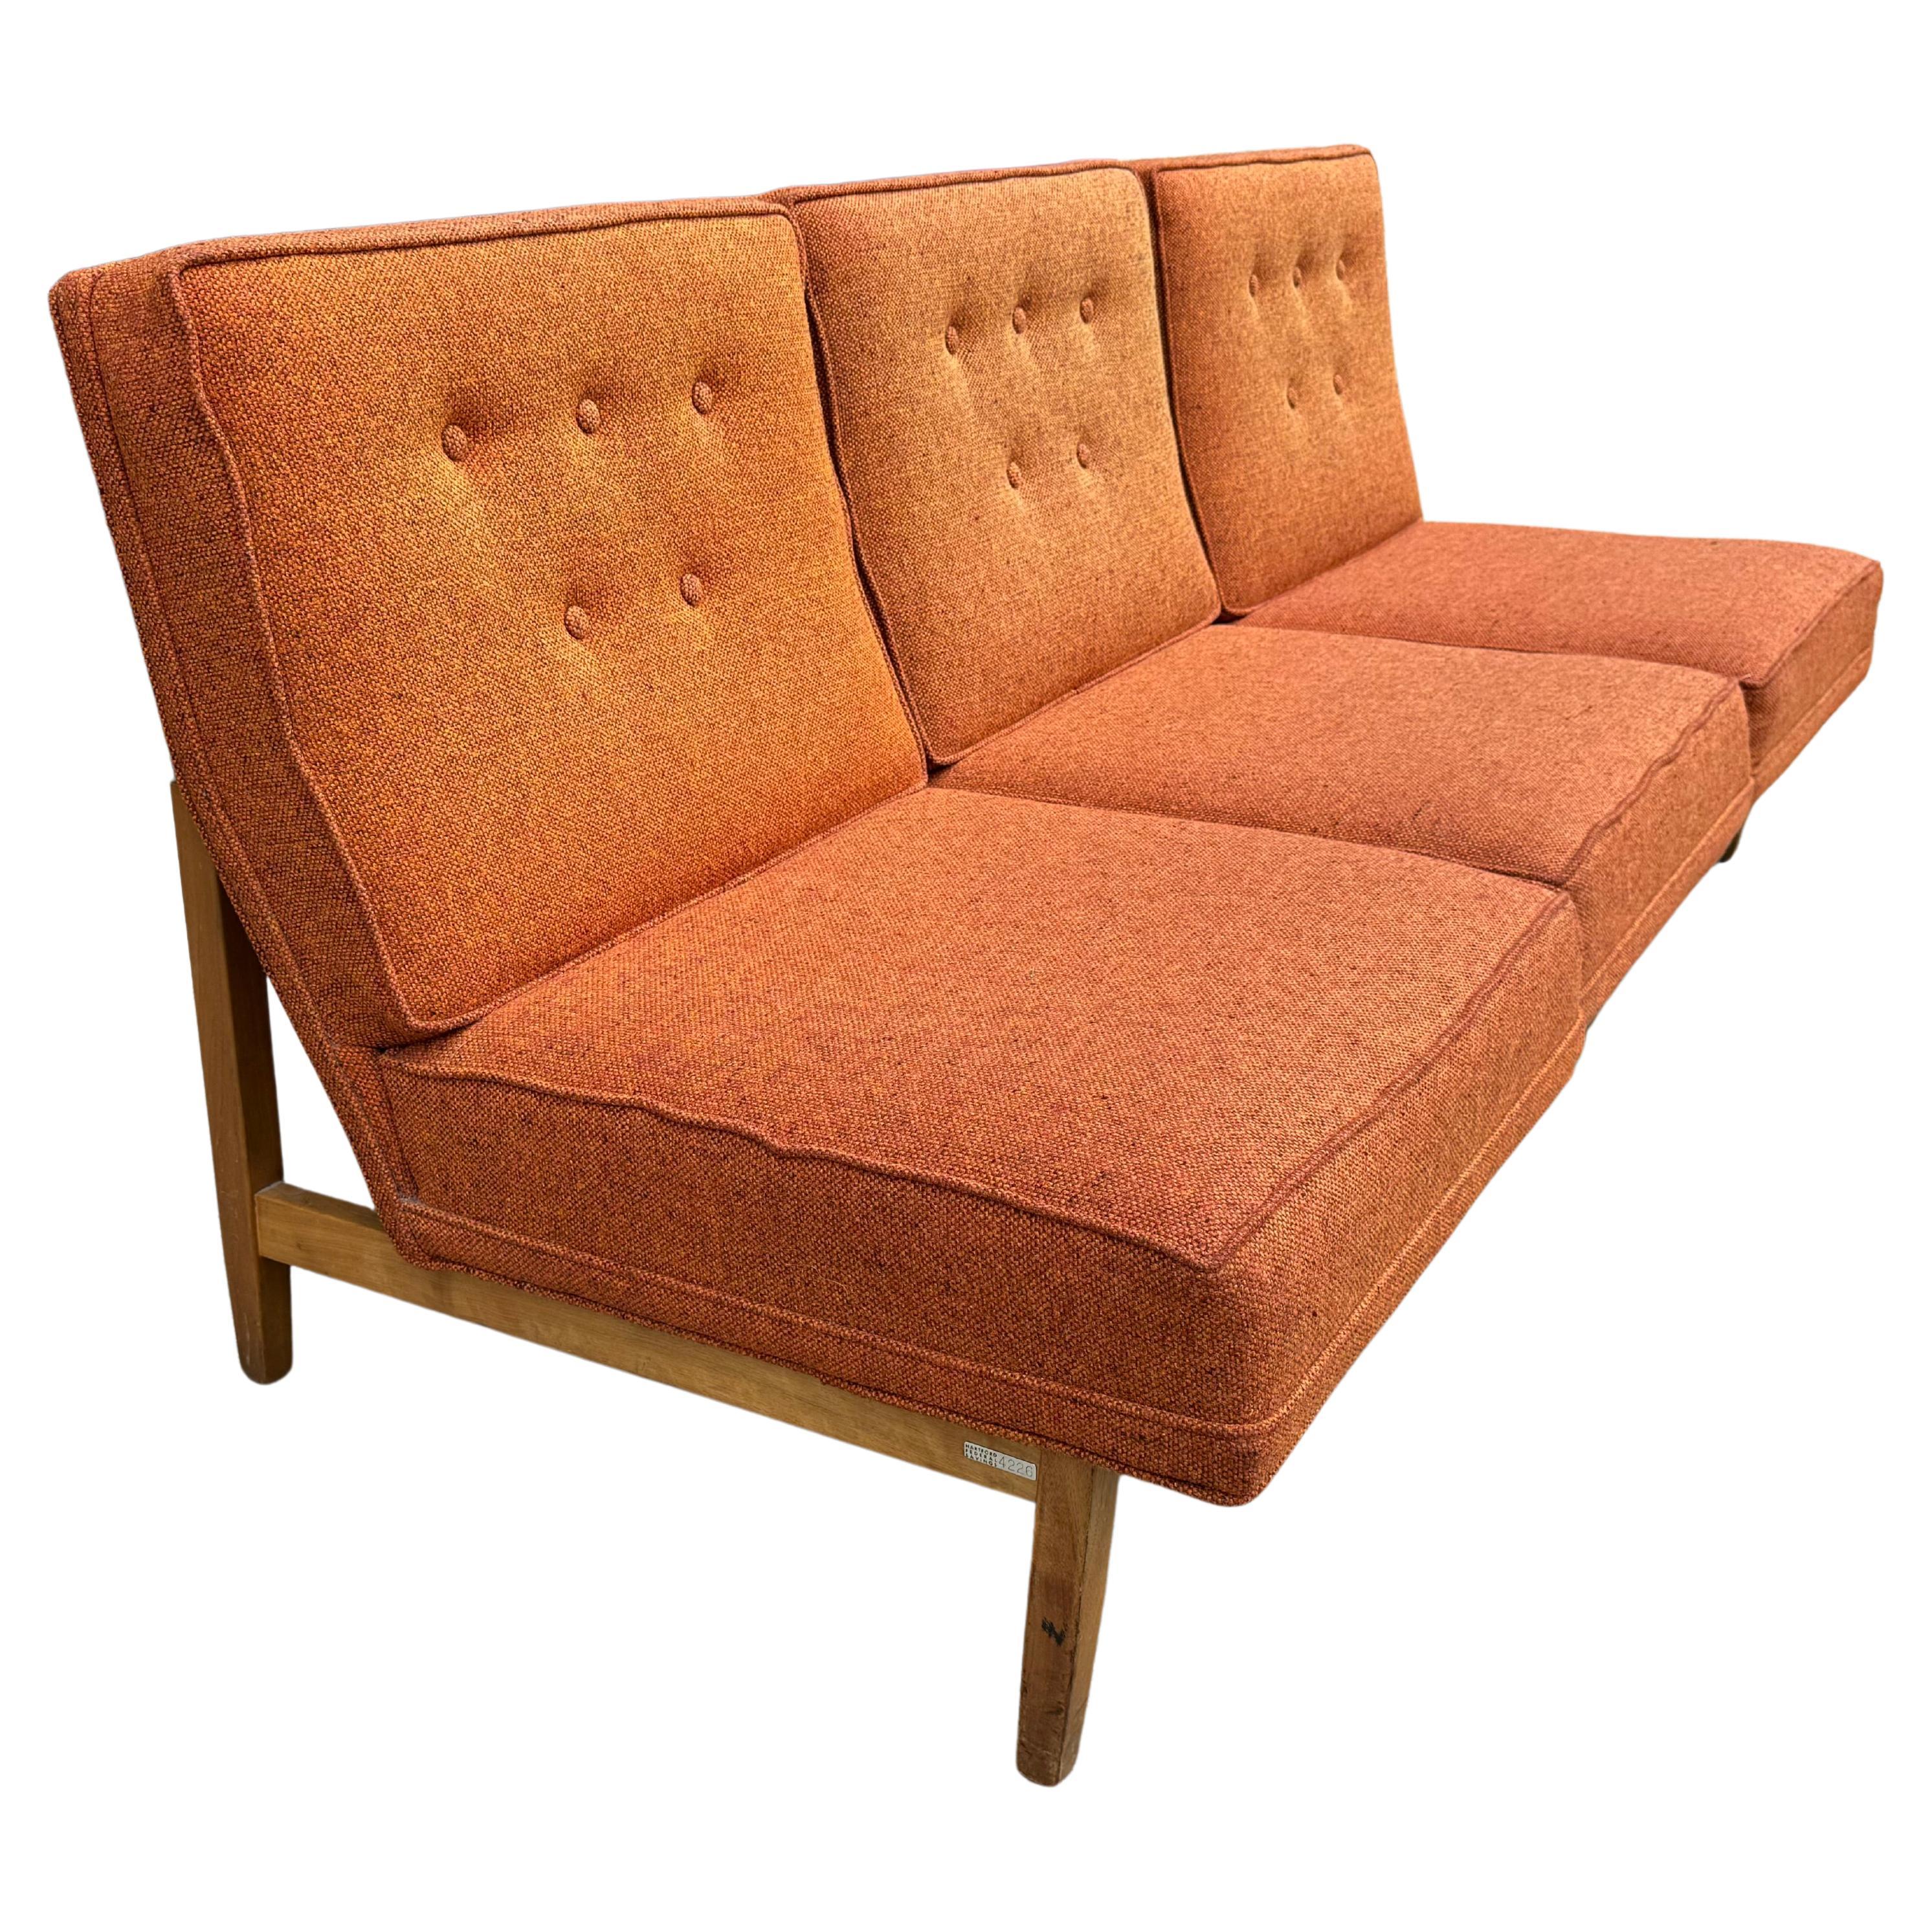 Set 3 Florence Knoll Slipper Chairs (3-seat sofa) . Classic Mid Century Modern For Sale